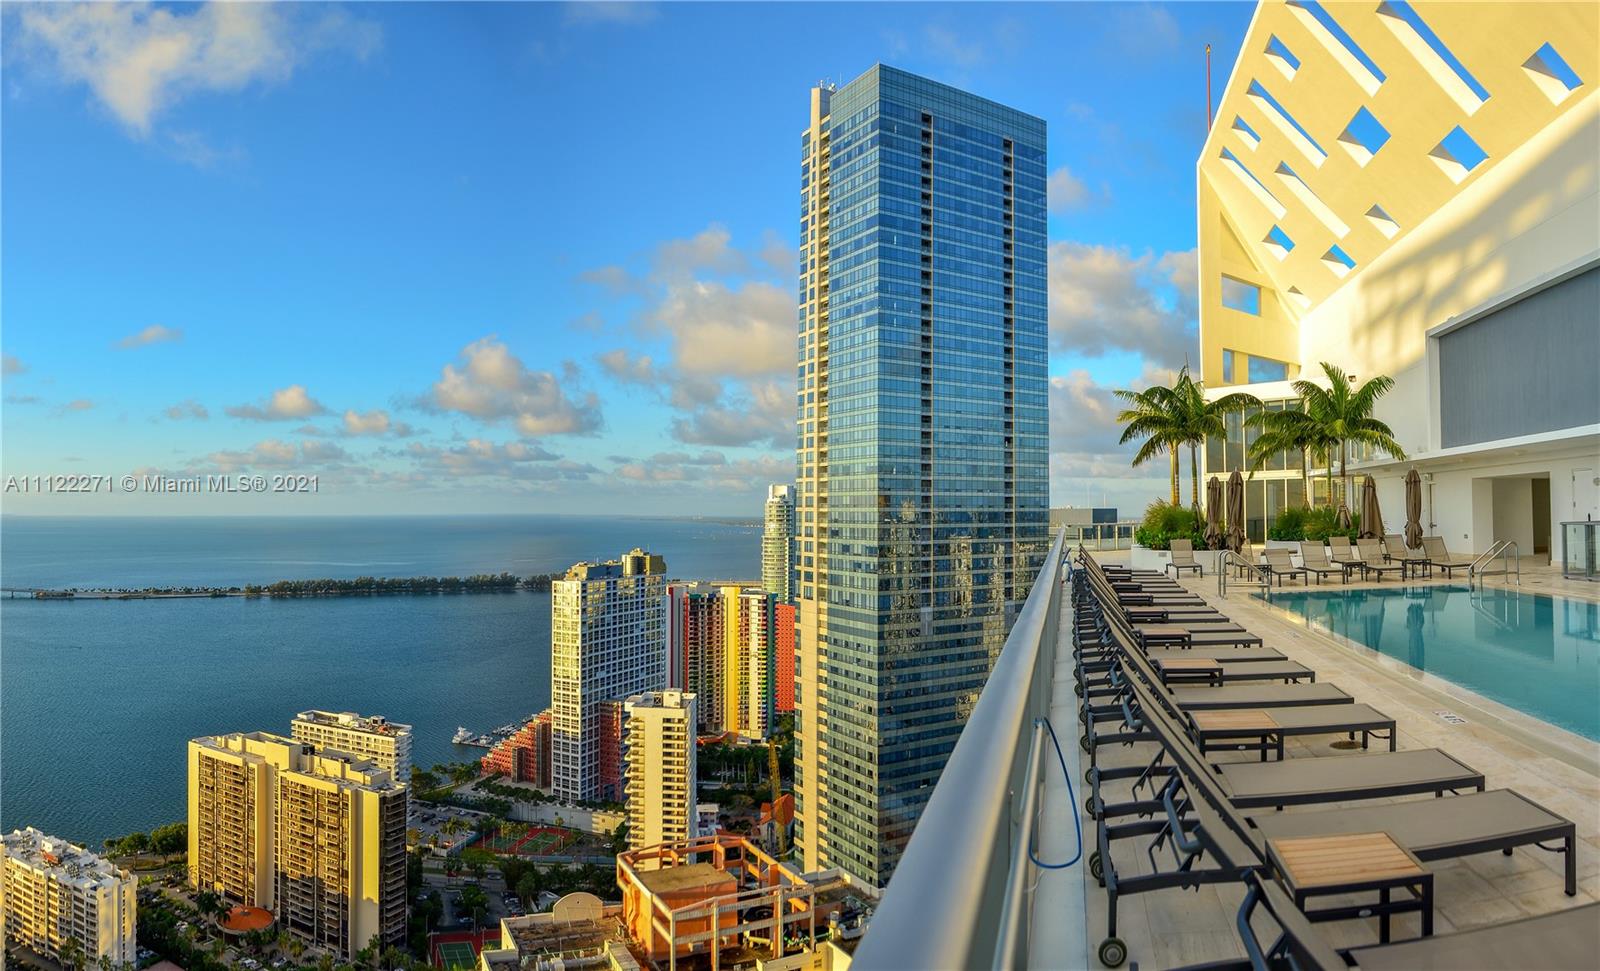 Amazing Penthouse with ocean view! This beautiful apartment is located in the heart of Brickell Area. The unit has 3 bedrooms +den and 3 1/2 bathrooms, premium build-in stainless steel appliances and European cabinets. Frameless glass shower enclosures. Great Amenities combining elegance and urban atmosphere. The building has two pools, a 50-foot long lap pool with amazing view of the Key Biscayne bridge and one rooftop pool , beautiful terrace with a barbecue area, luxury health spa with sauna and fitness center. 24 hour welcome desk. Enjoy the experience of living at Brickell House.